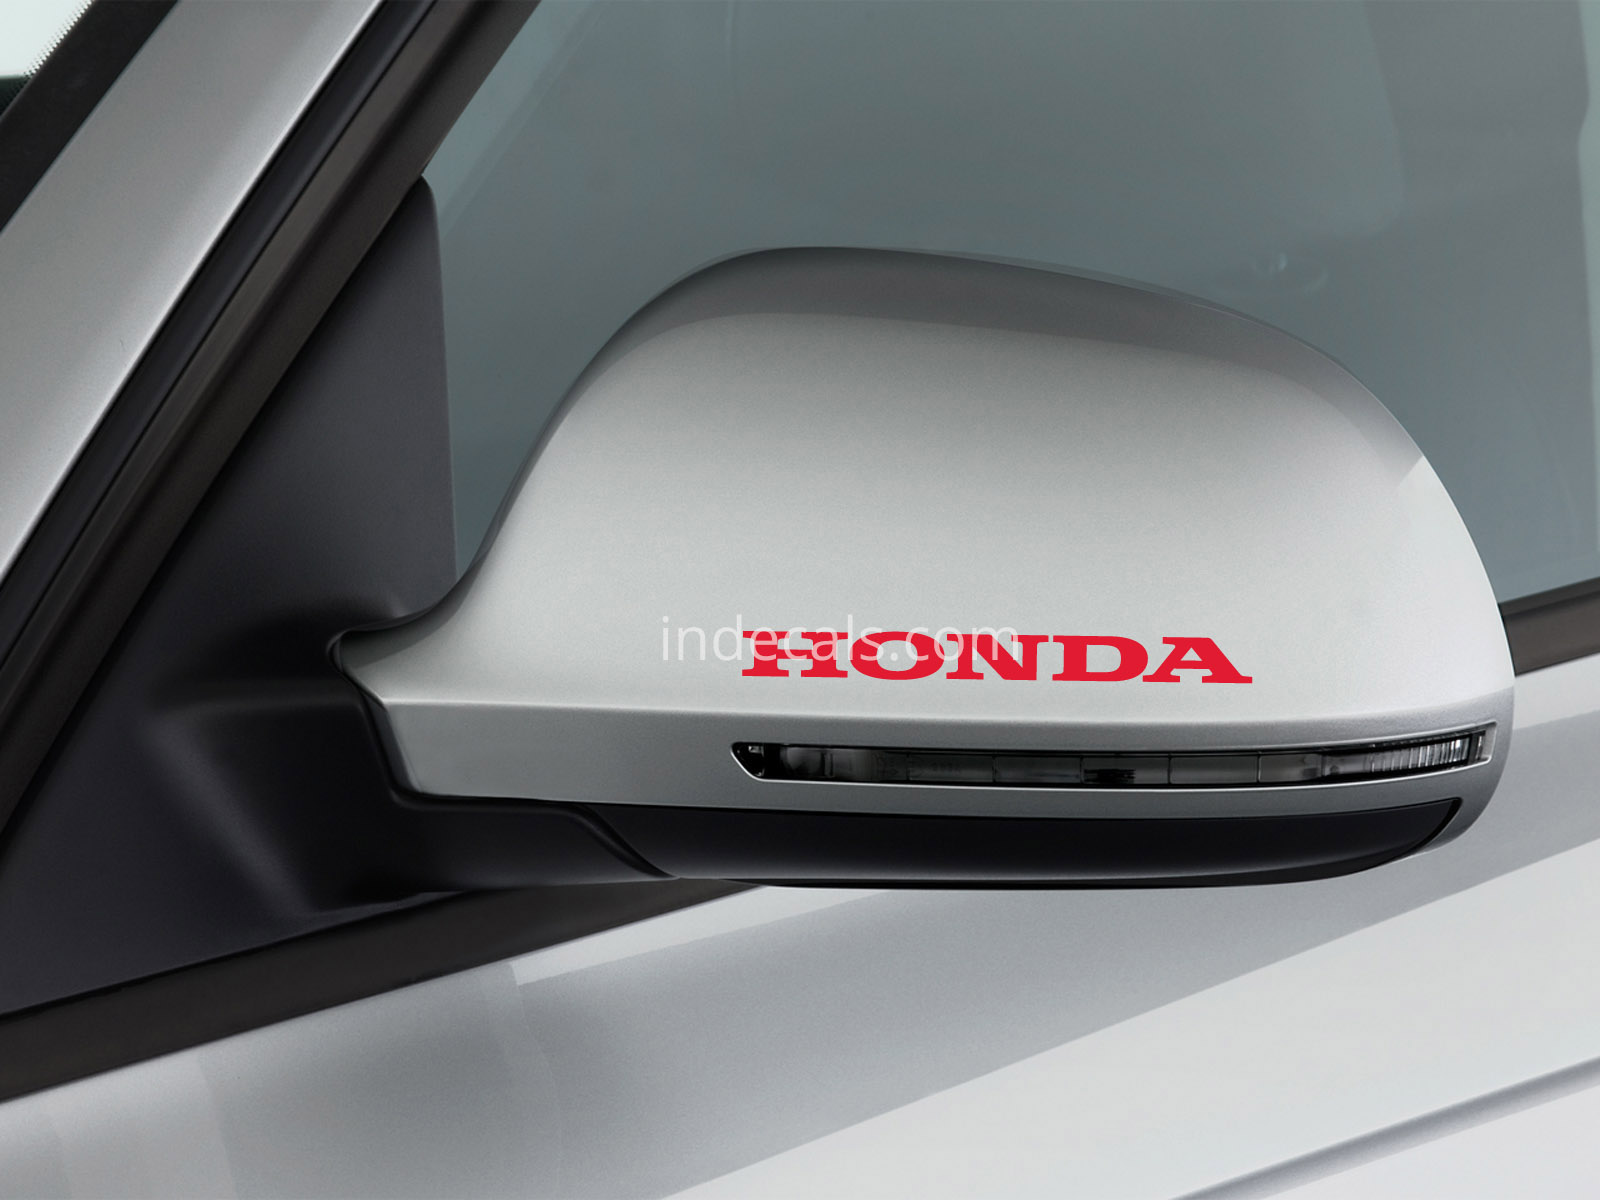 3 x Honda Stickers for Mirrors - Red